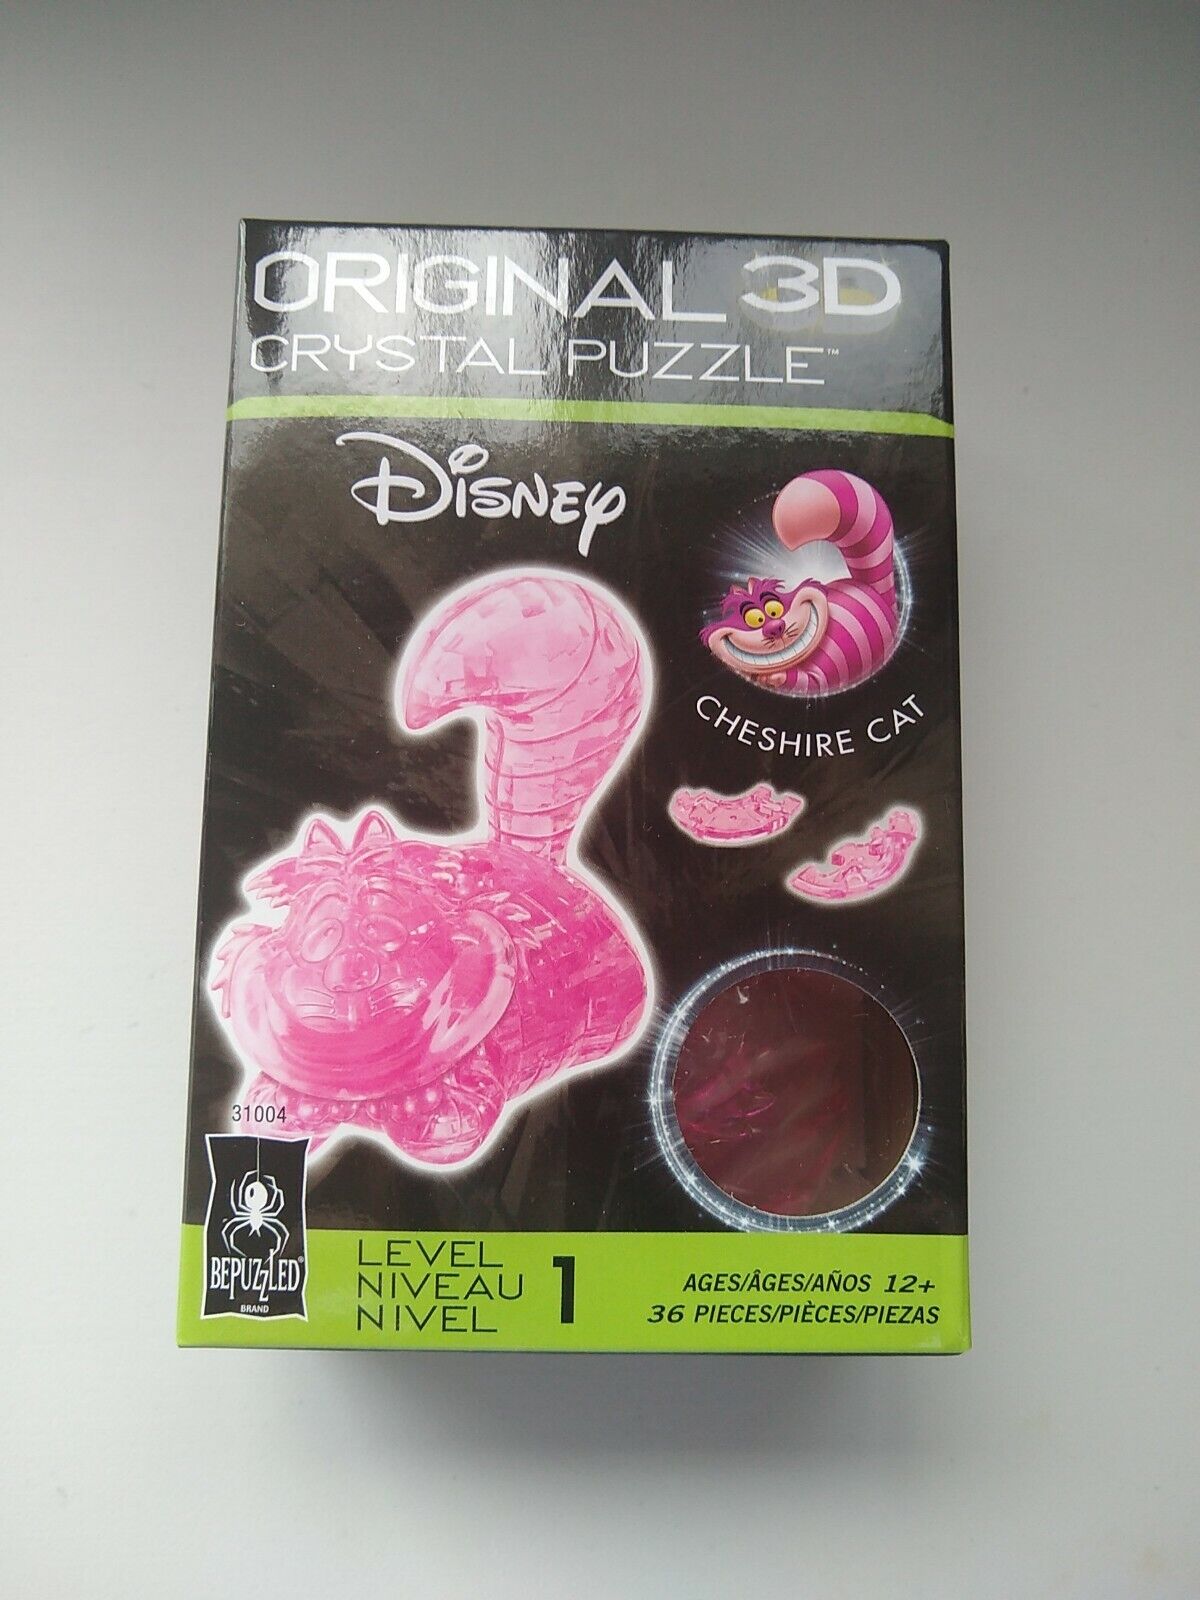 BePuzzled 3D Crystal Puzzle - Disney Cheshire Cat Pink - 36 Pcs - Free Shipping!